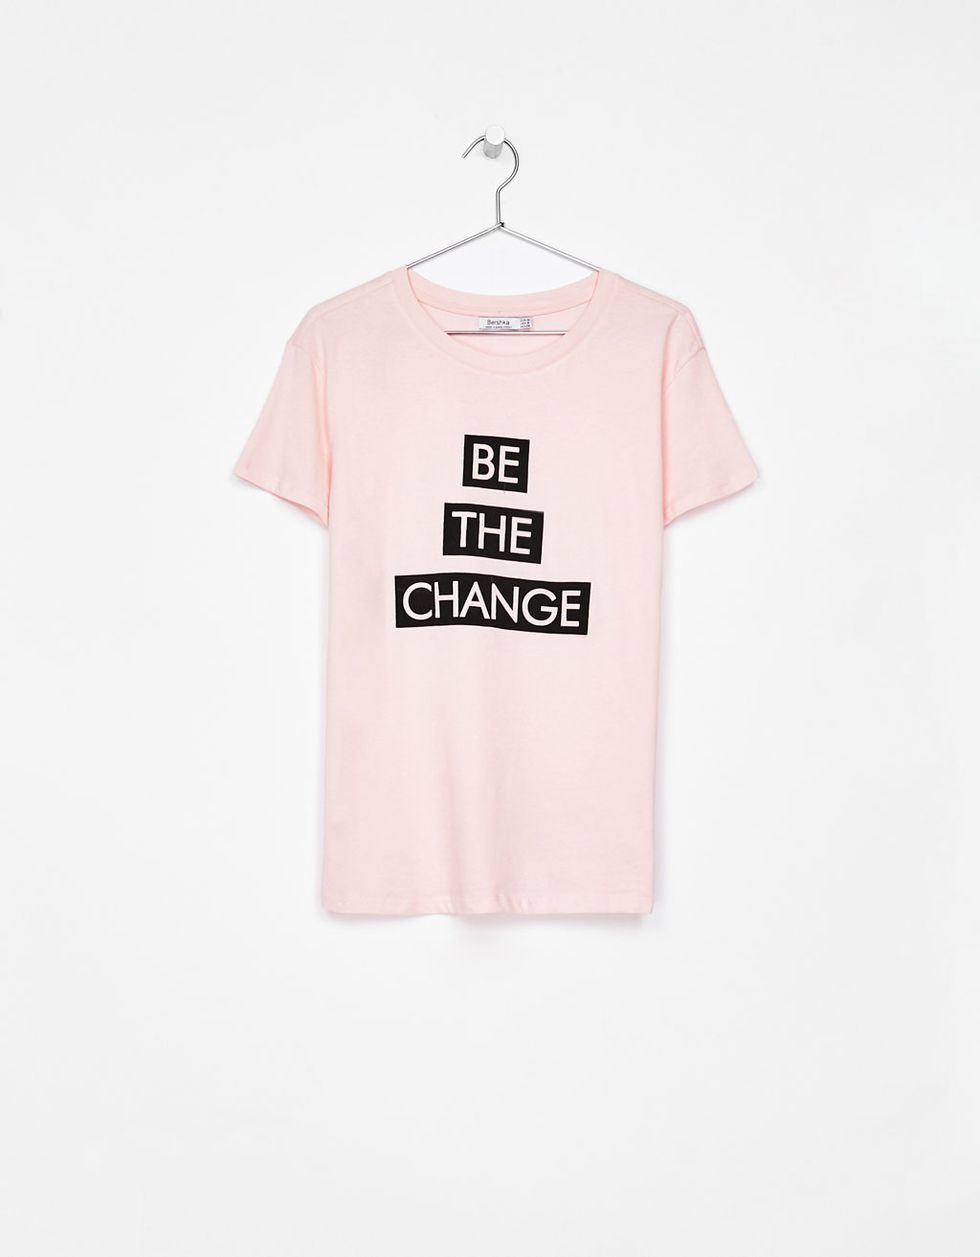 T-shirt, Clothing, White, Pink, Sleeve, Product, Text, Active shirt, Top, Orange, 